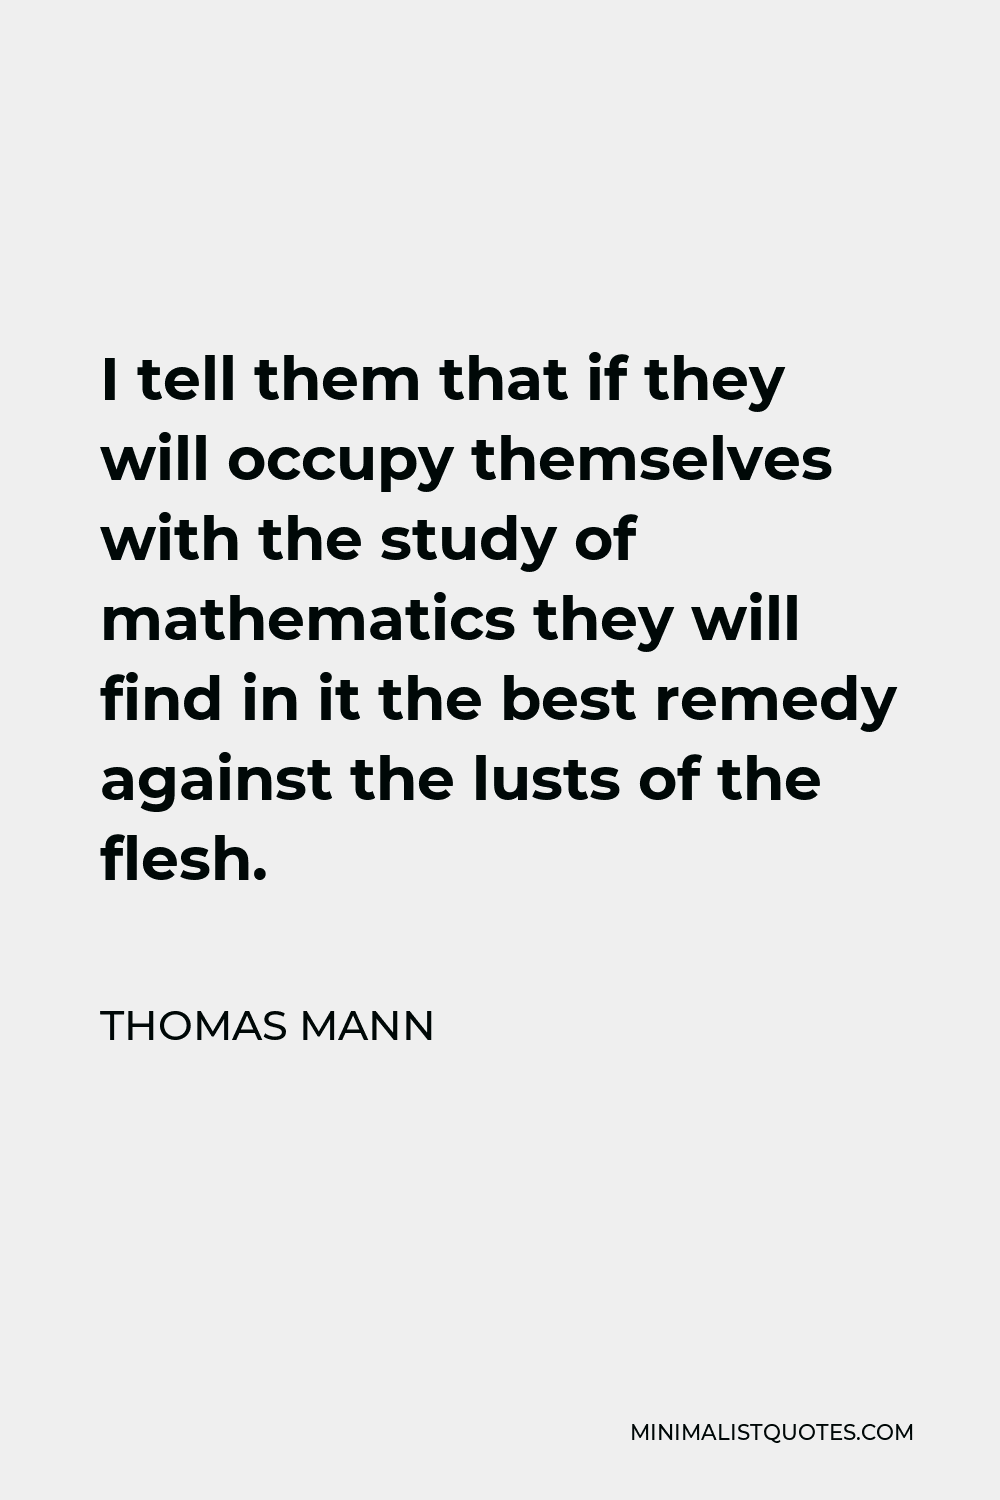 Thomas Mann Quote - I tell them that if they will occupy themselves with the study of mathematics they will find in it the best remedy against the lusts of the flesh.